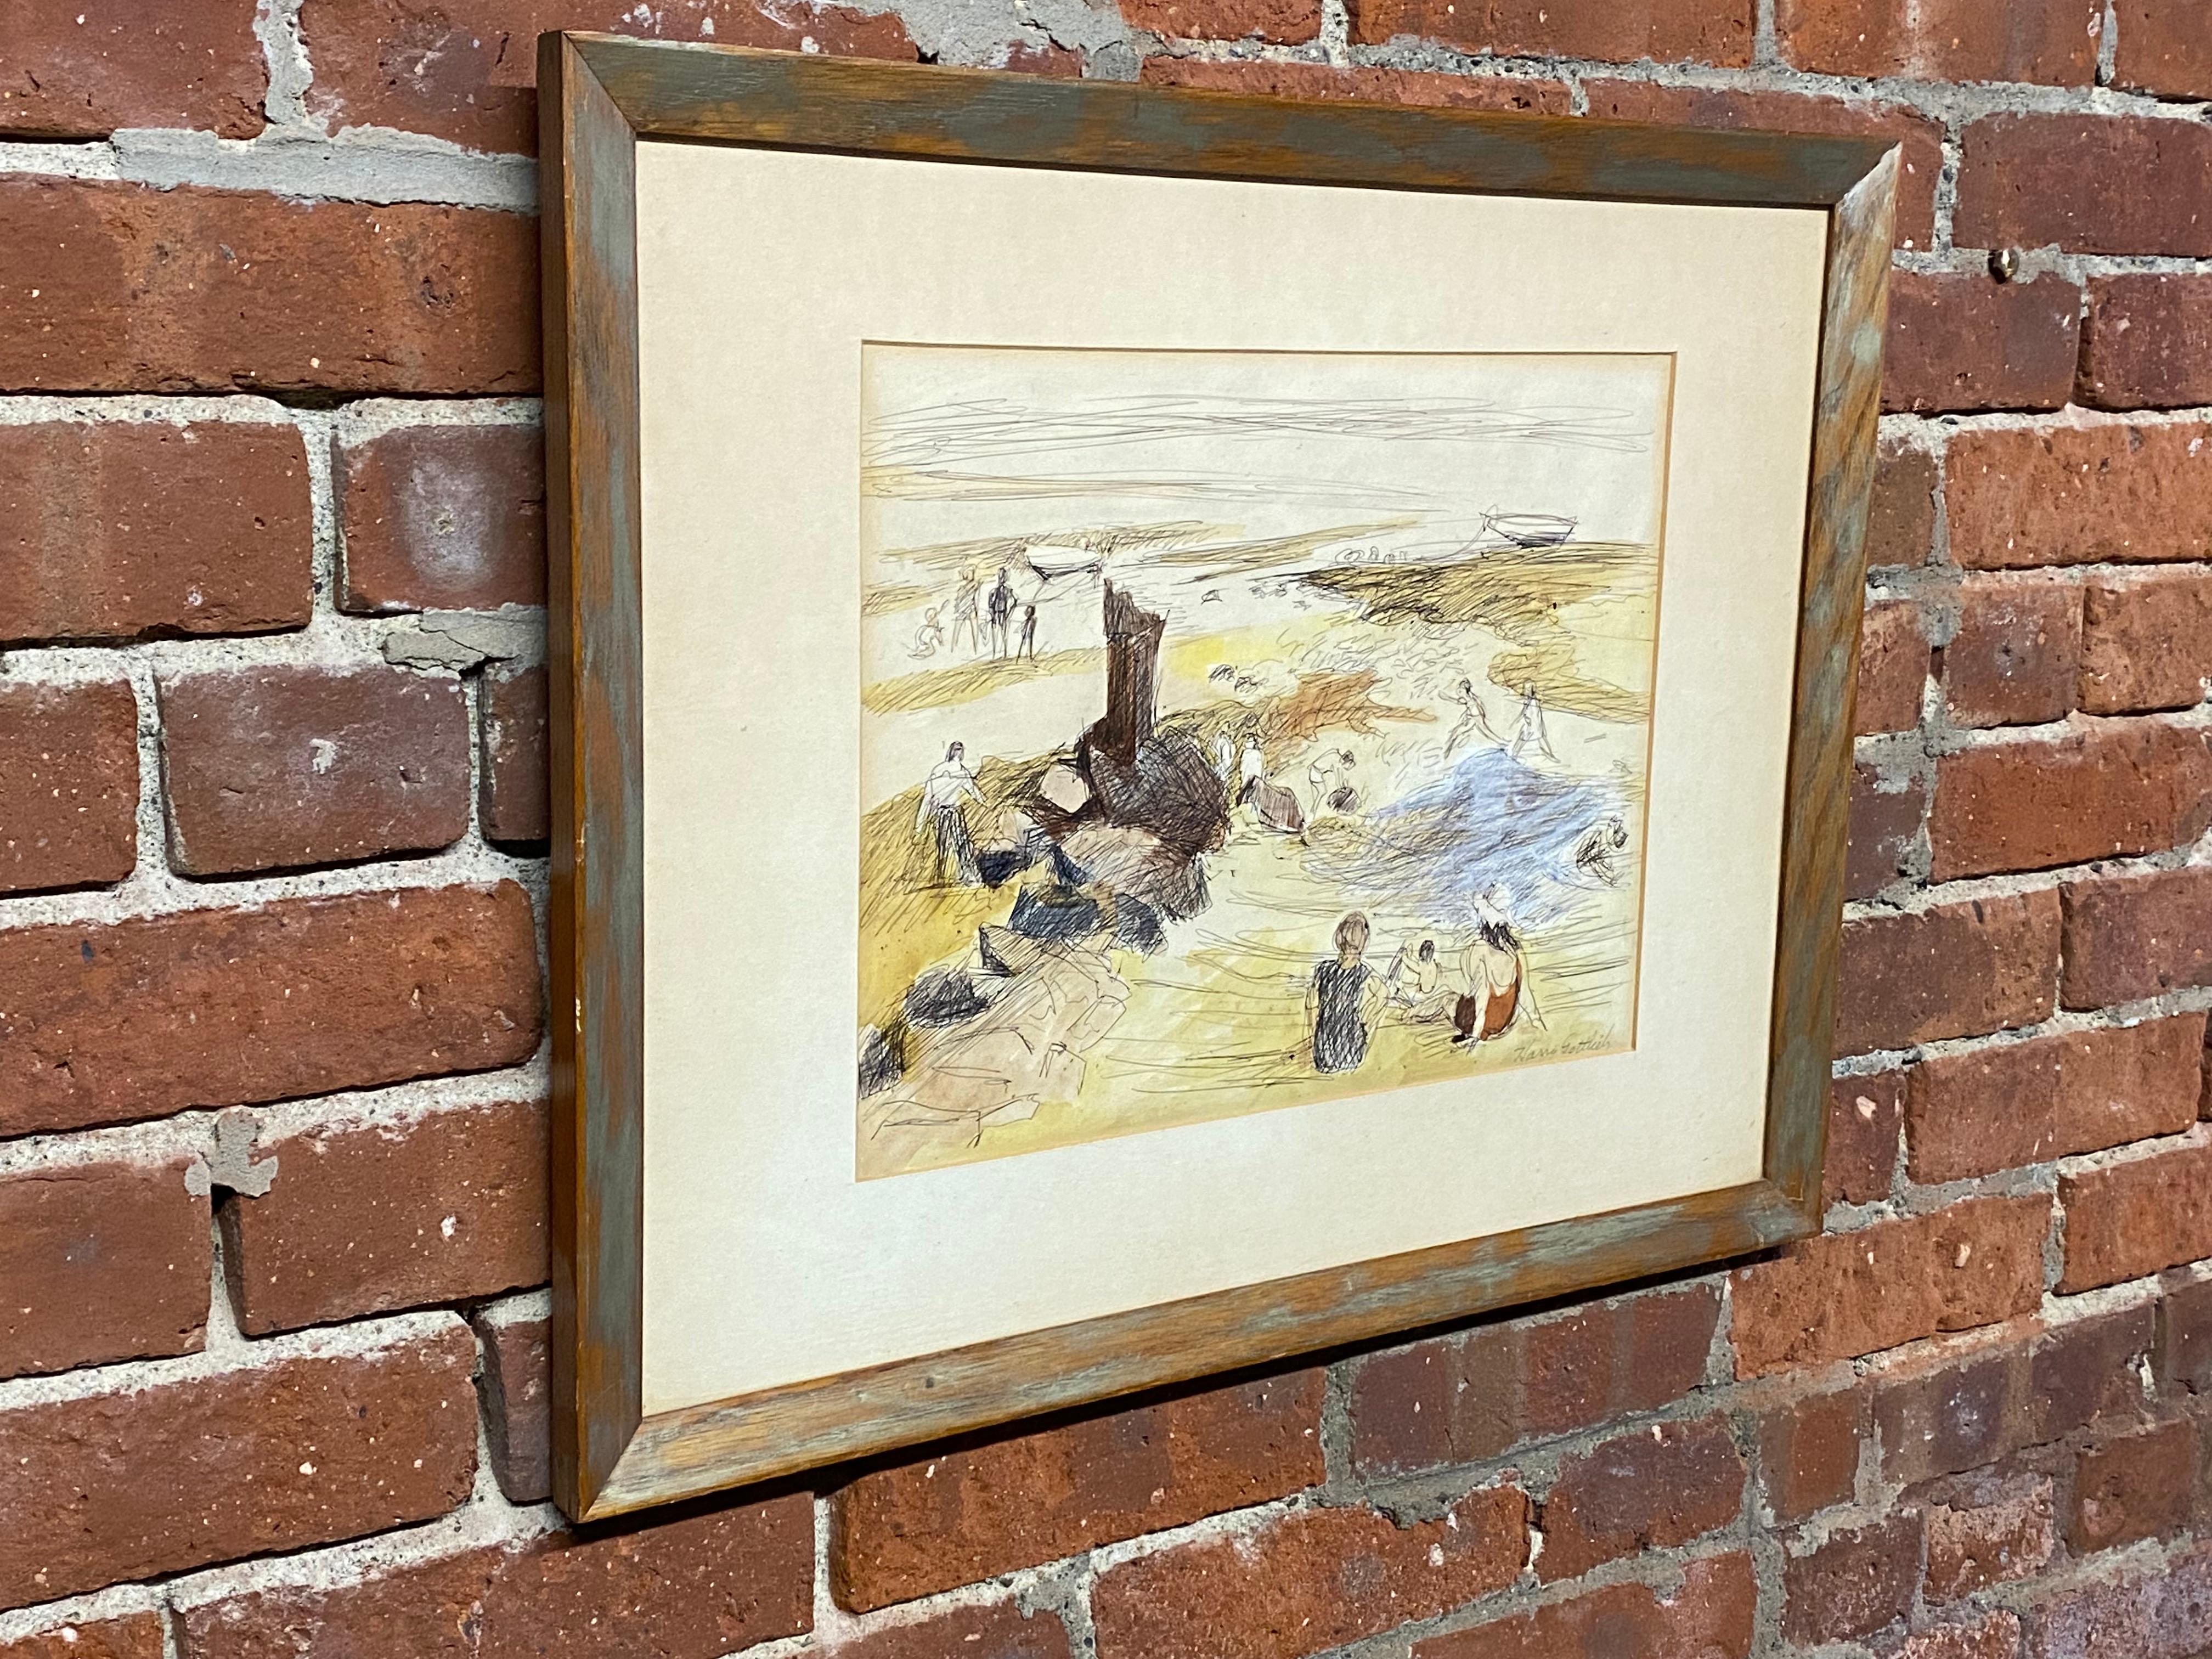 Mixed media watercolor and ink beach scene. Watercolor on paper. Signed Harry Gottlieb lower right corner. Distressed gray paint on an oak frame, matted under glass. Circa 1940-50. The piece has not been viewed out of the frame. Good overall